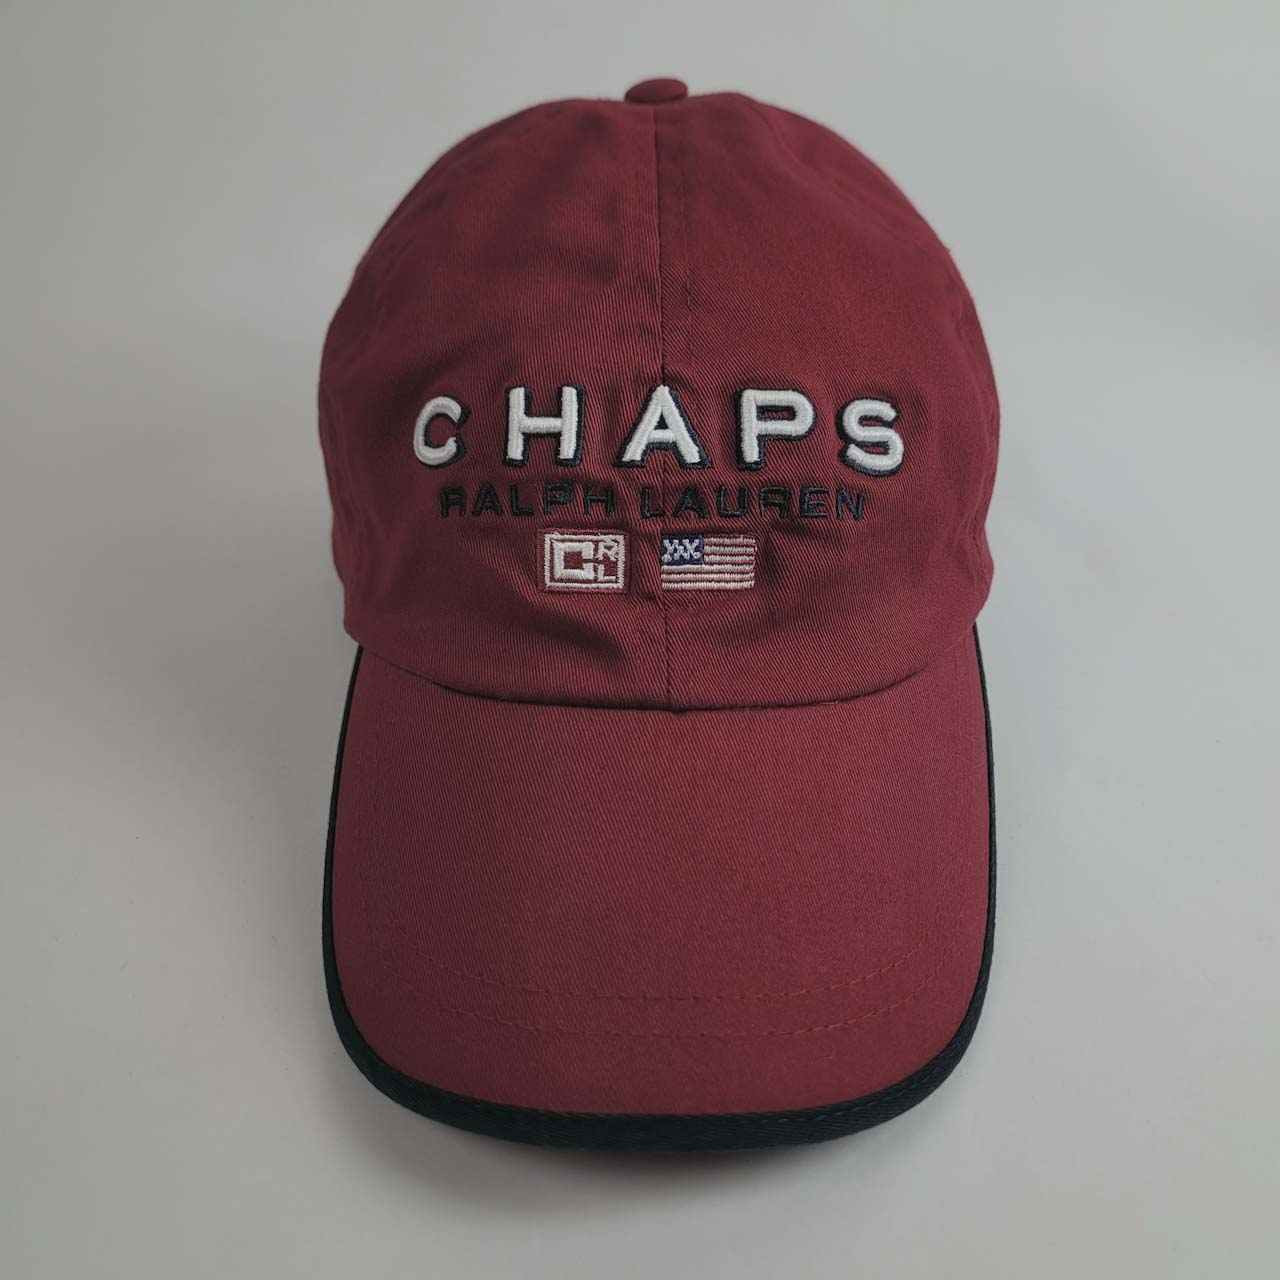 Cap - Chaps Ralph Lauren - Red - Embroidered Front - Fitted - Unisex -  Treasure Website